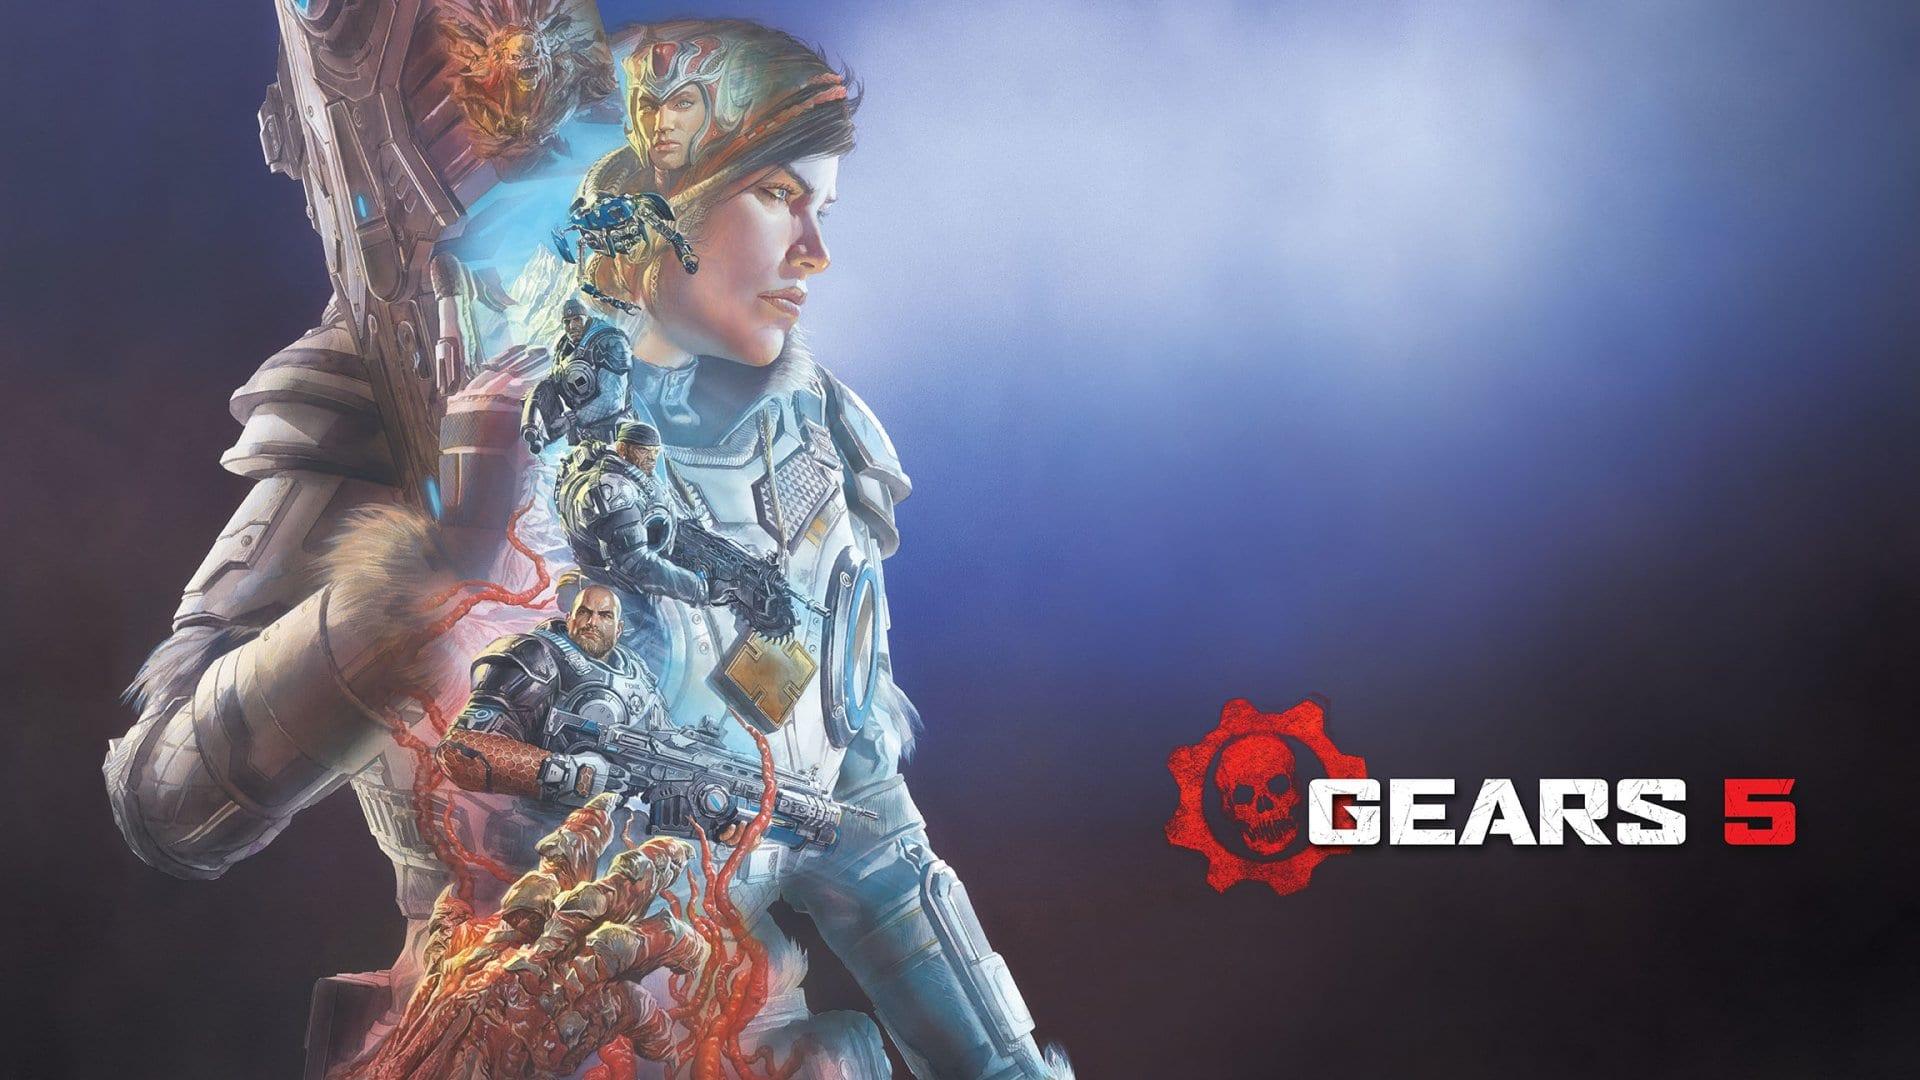 4K & HD Gears 5 Wallpaper You Need to Make Your Next